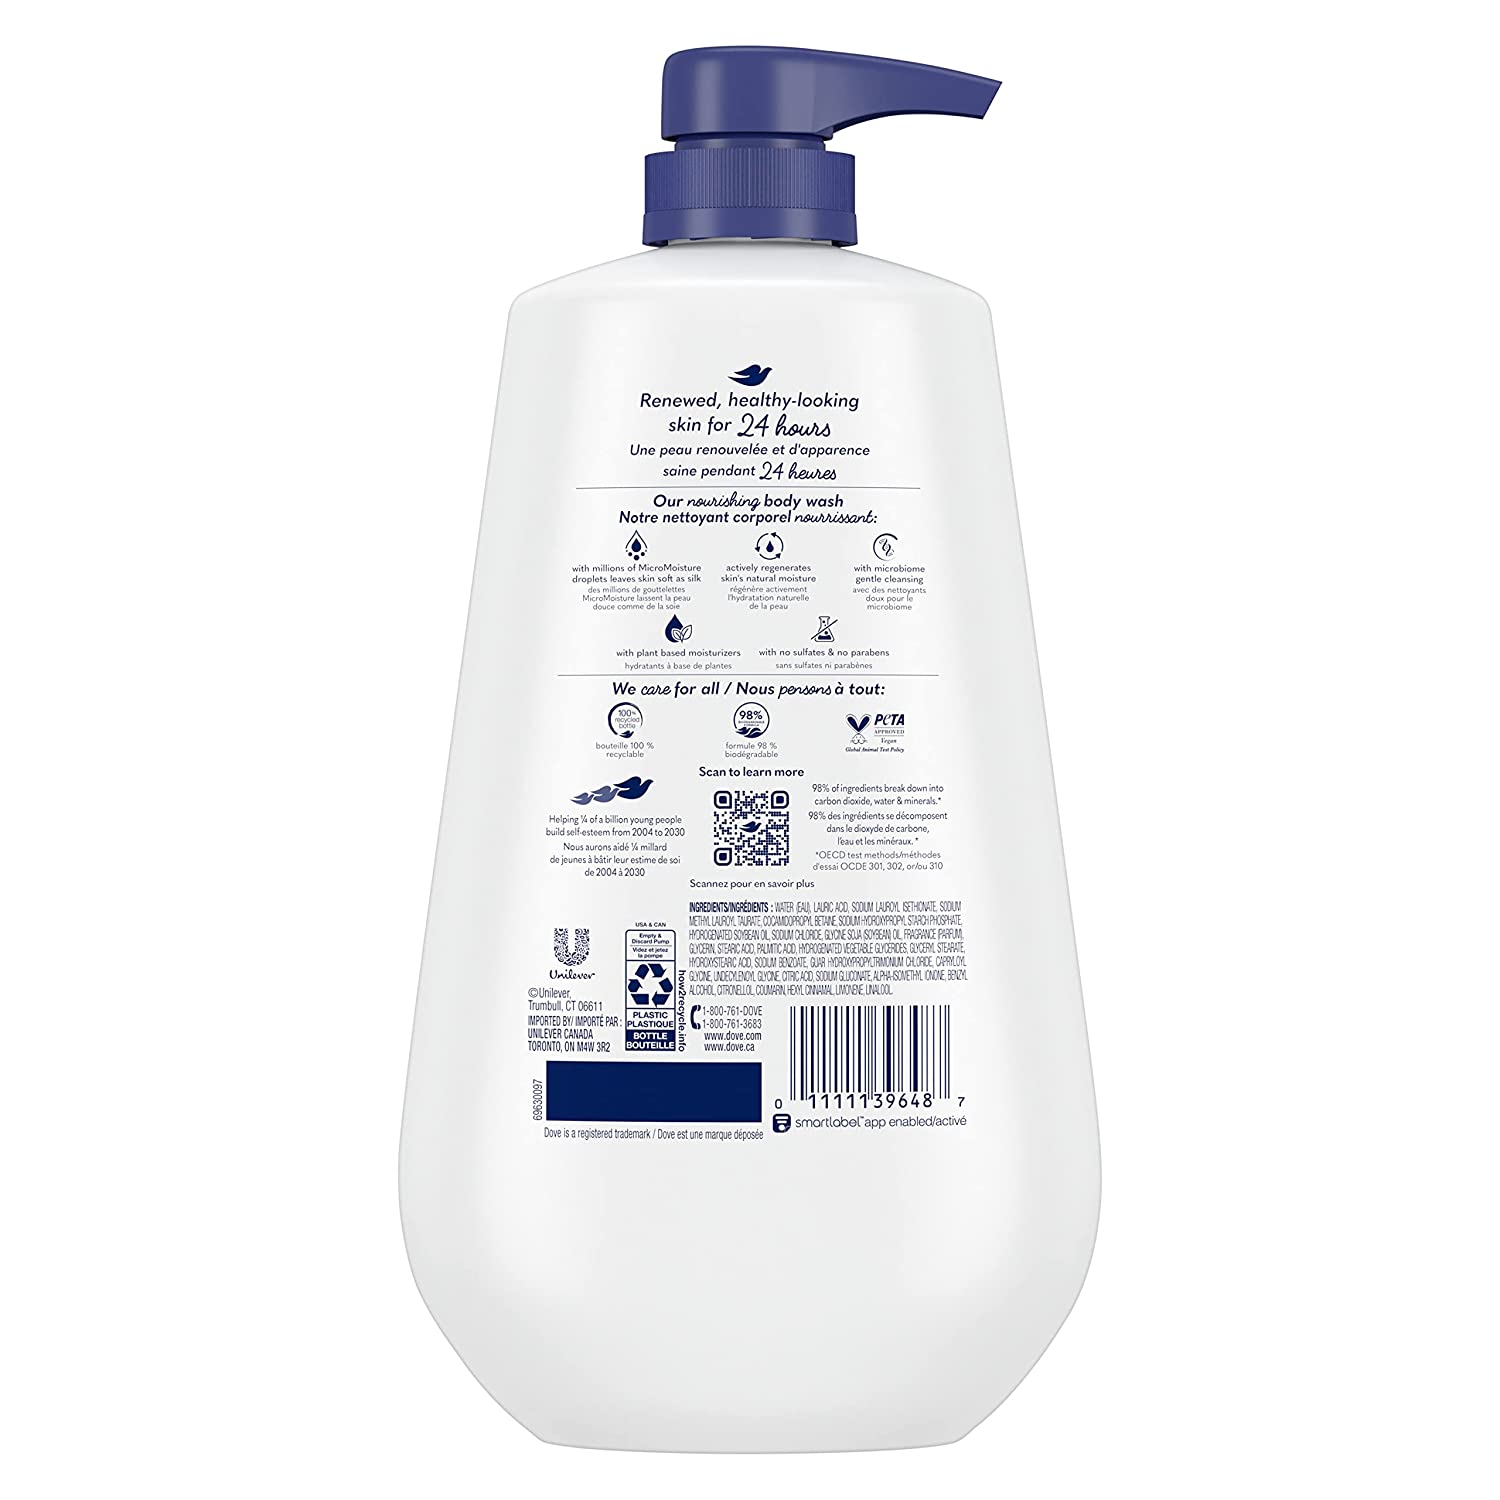 30.6-Oz Dove Body Wash with Pump Deep Moisture For Dry Skin $6.75 w/ S&S + Free S&H w/ Prime or $25+